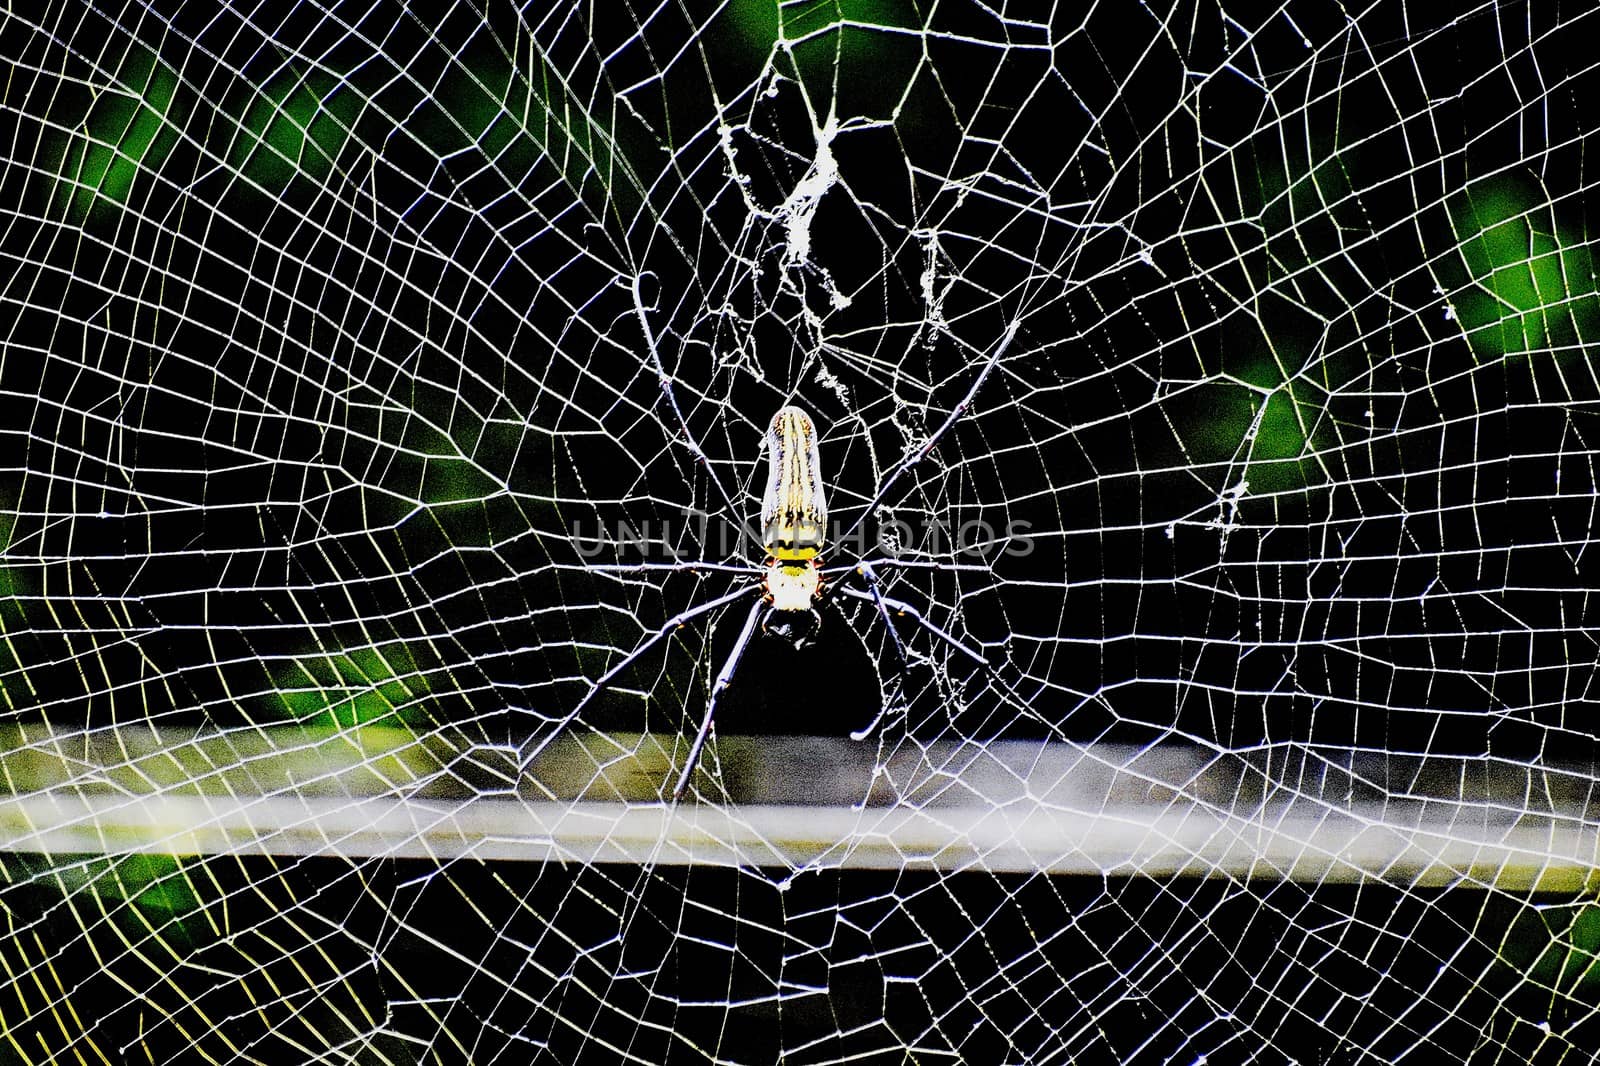 spider insect by ravindrabhu165165@gmail.com